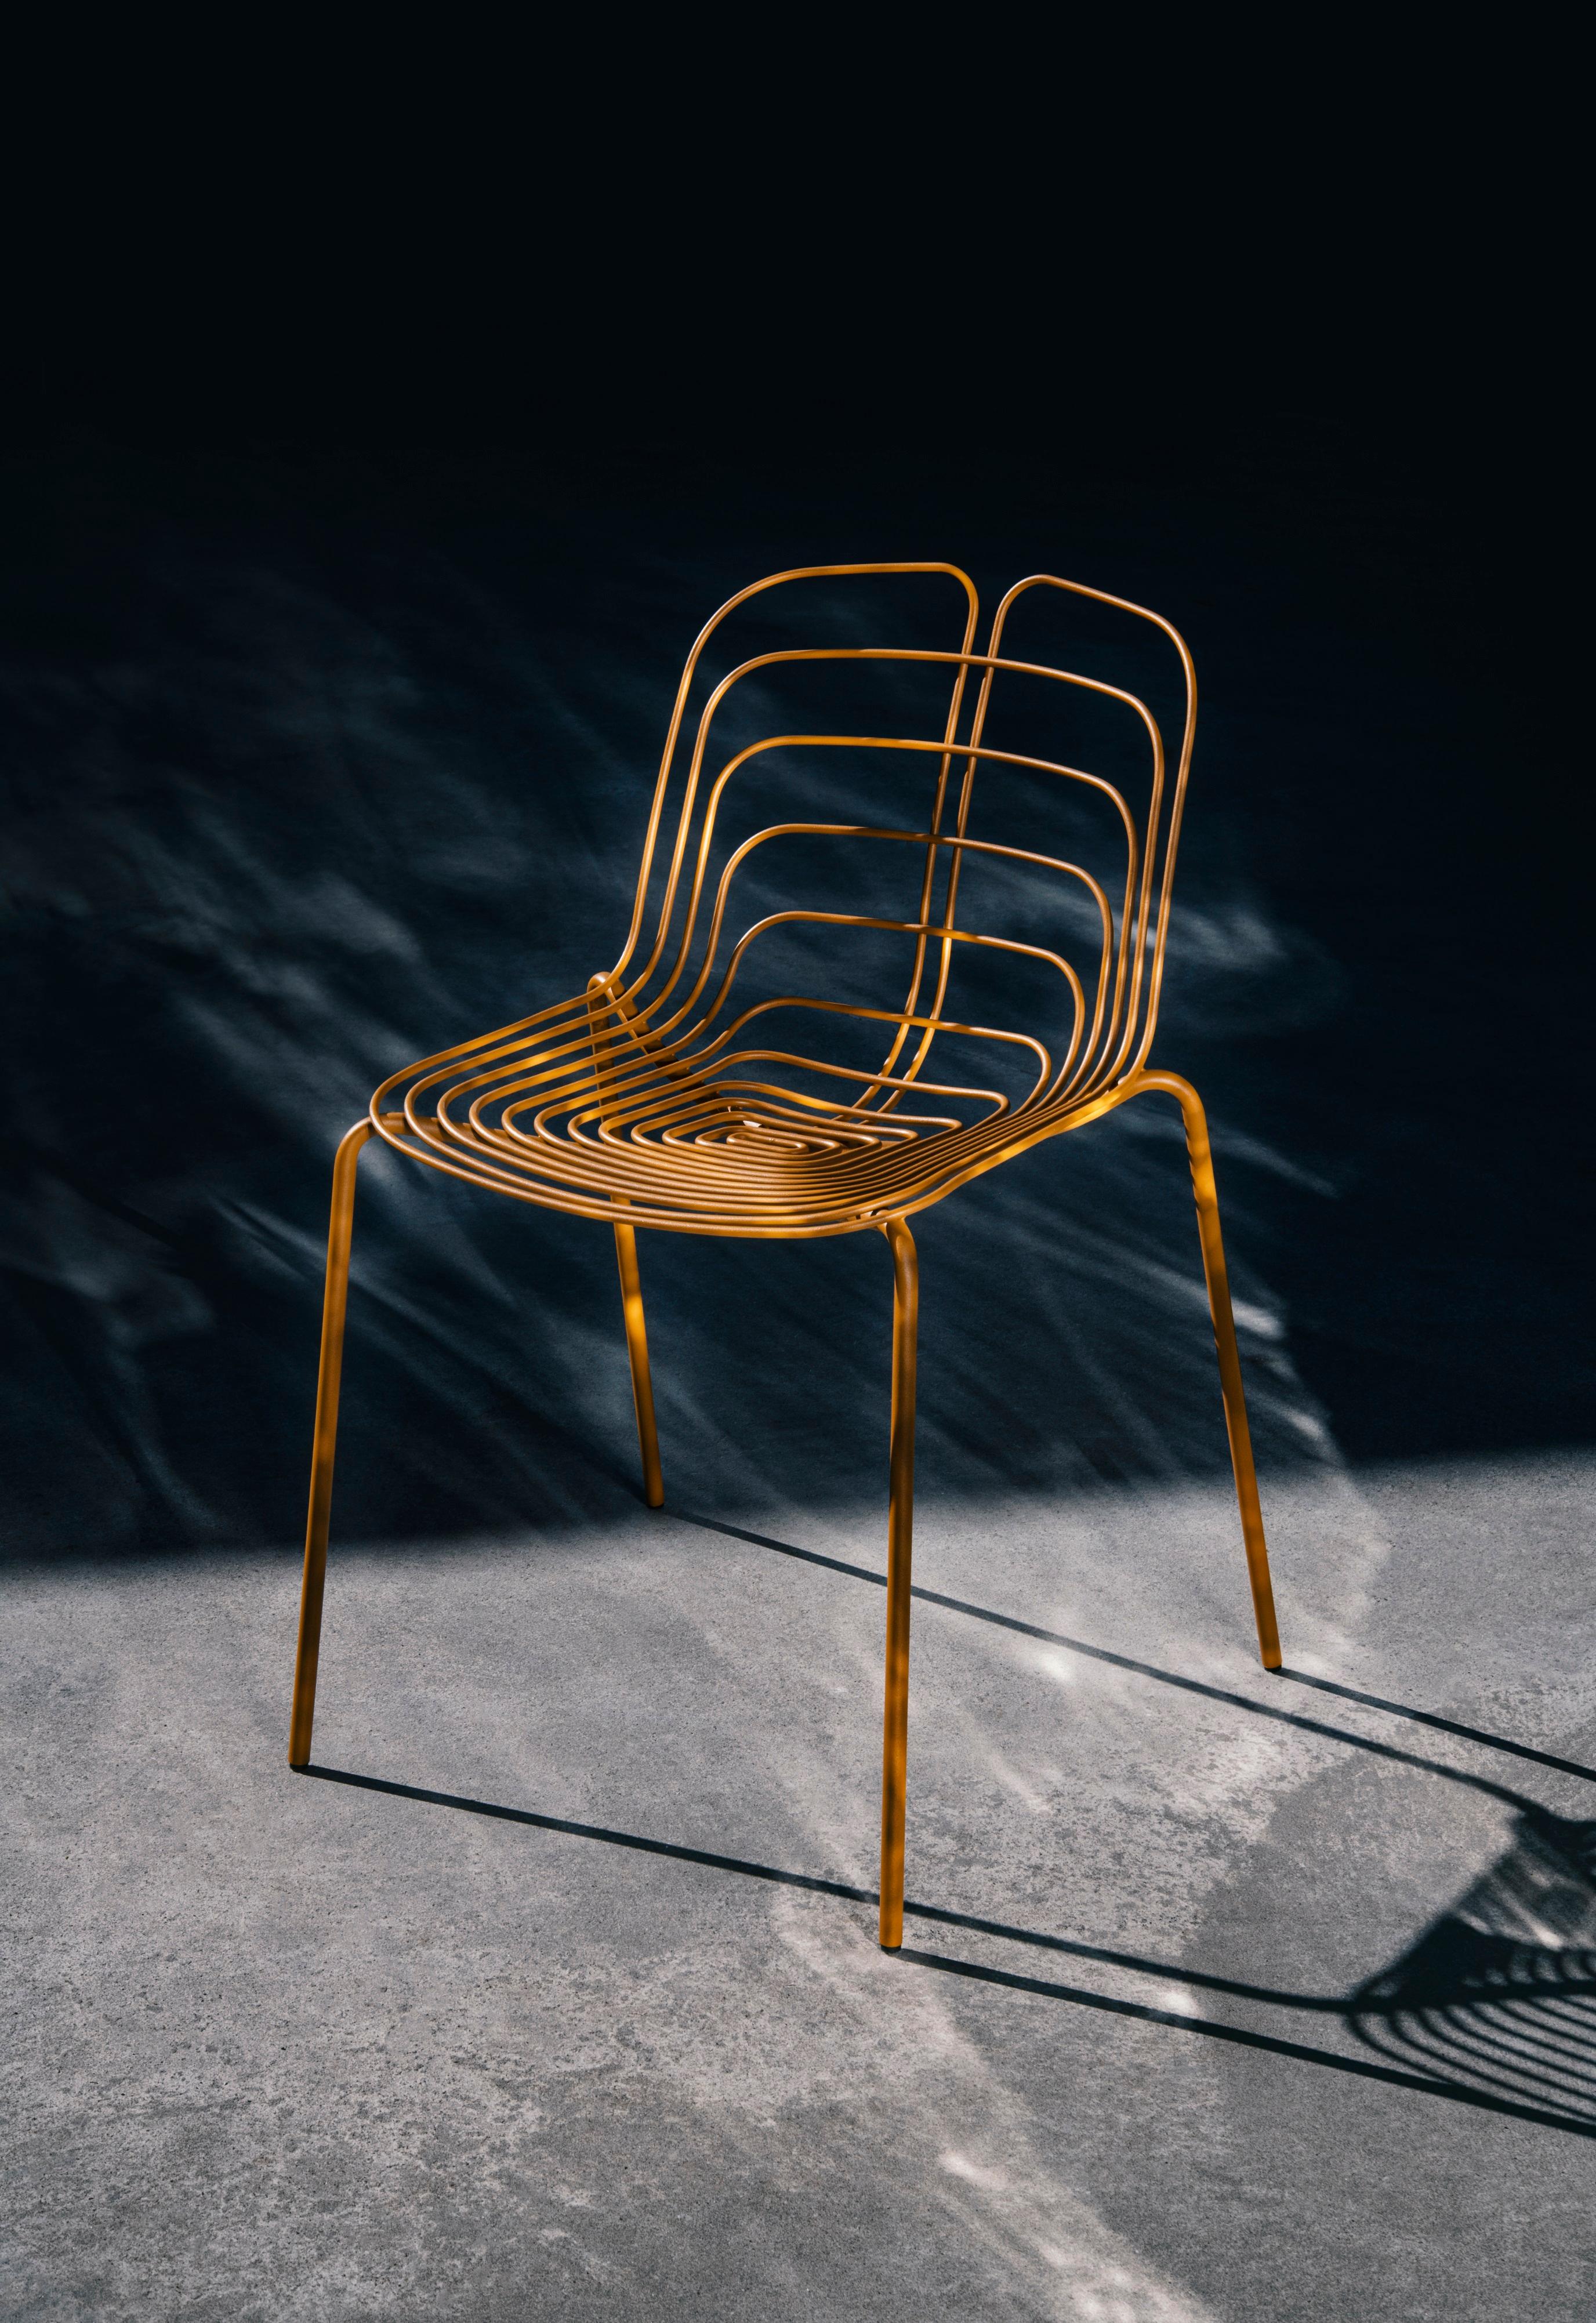 Stackable - up to 3
Different bases and finishes available.
The Wired Chair by Michael Young is a proud tribute to Harry Bertoia’s iconic design. This updated take on a classic piece is crafted from the same industrial material — steel wire, but